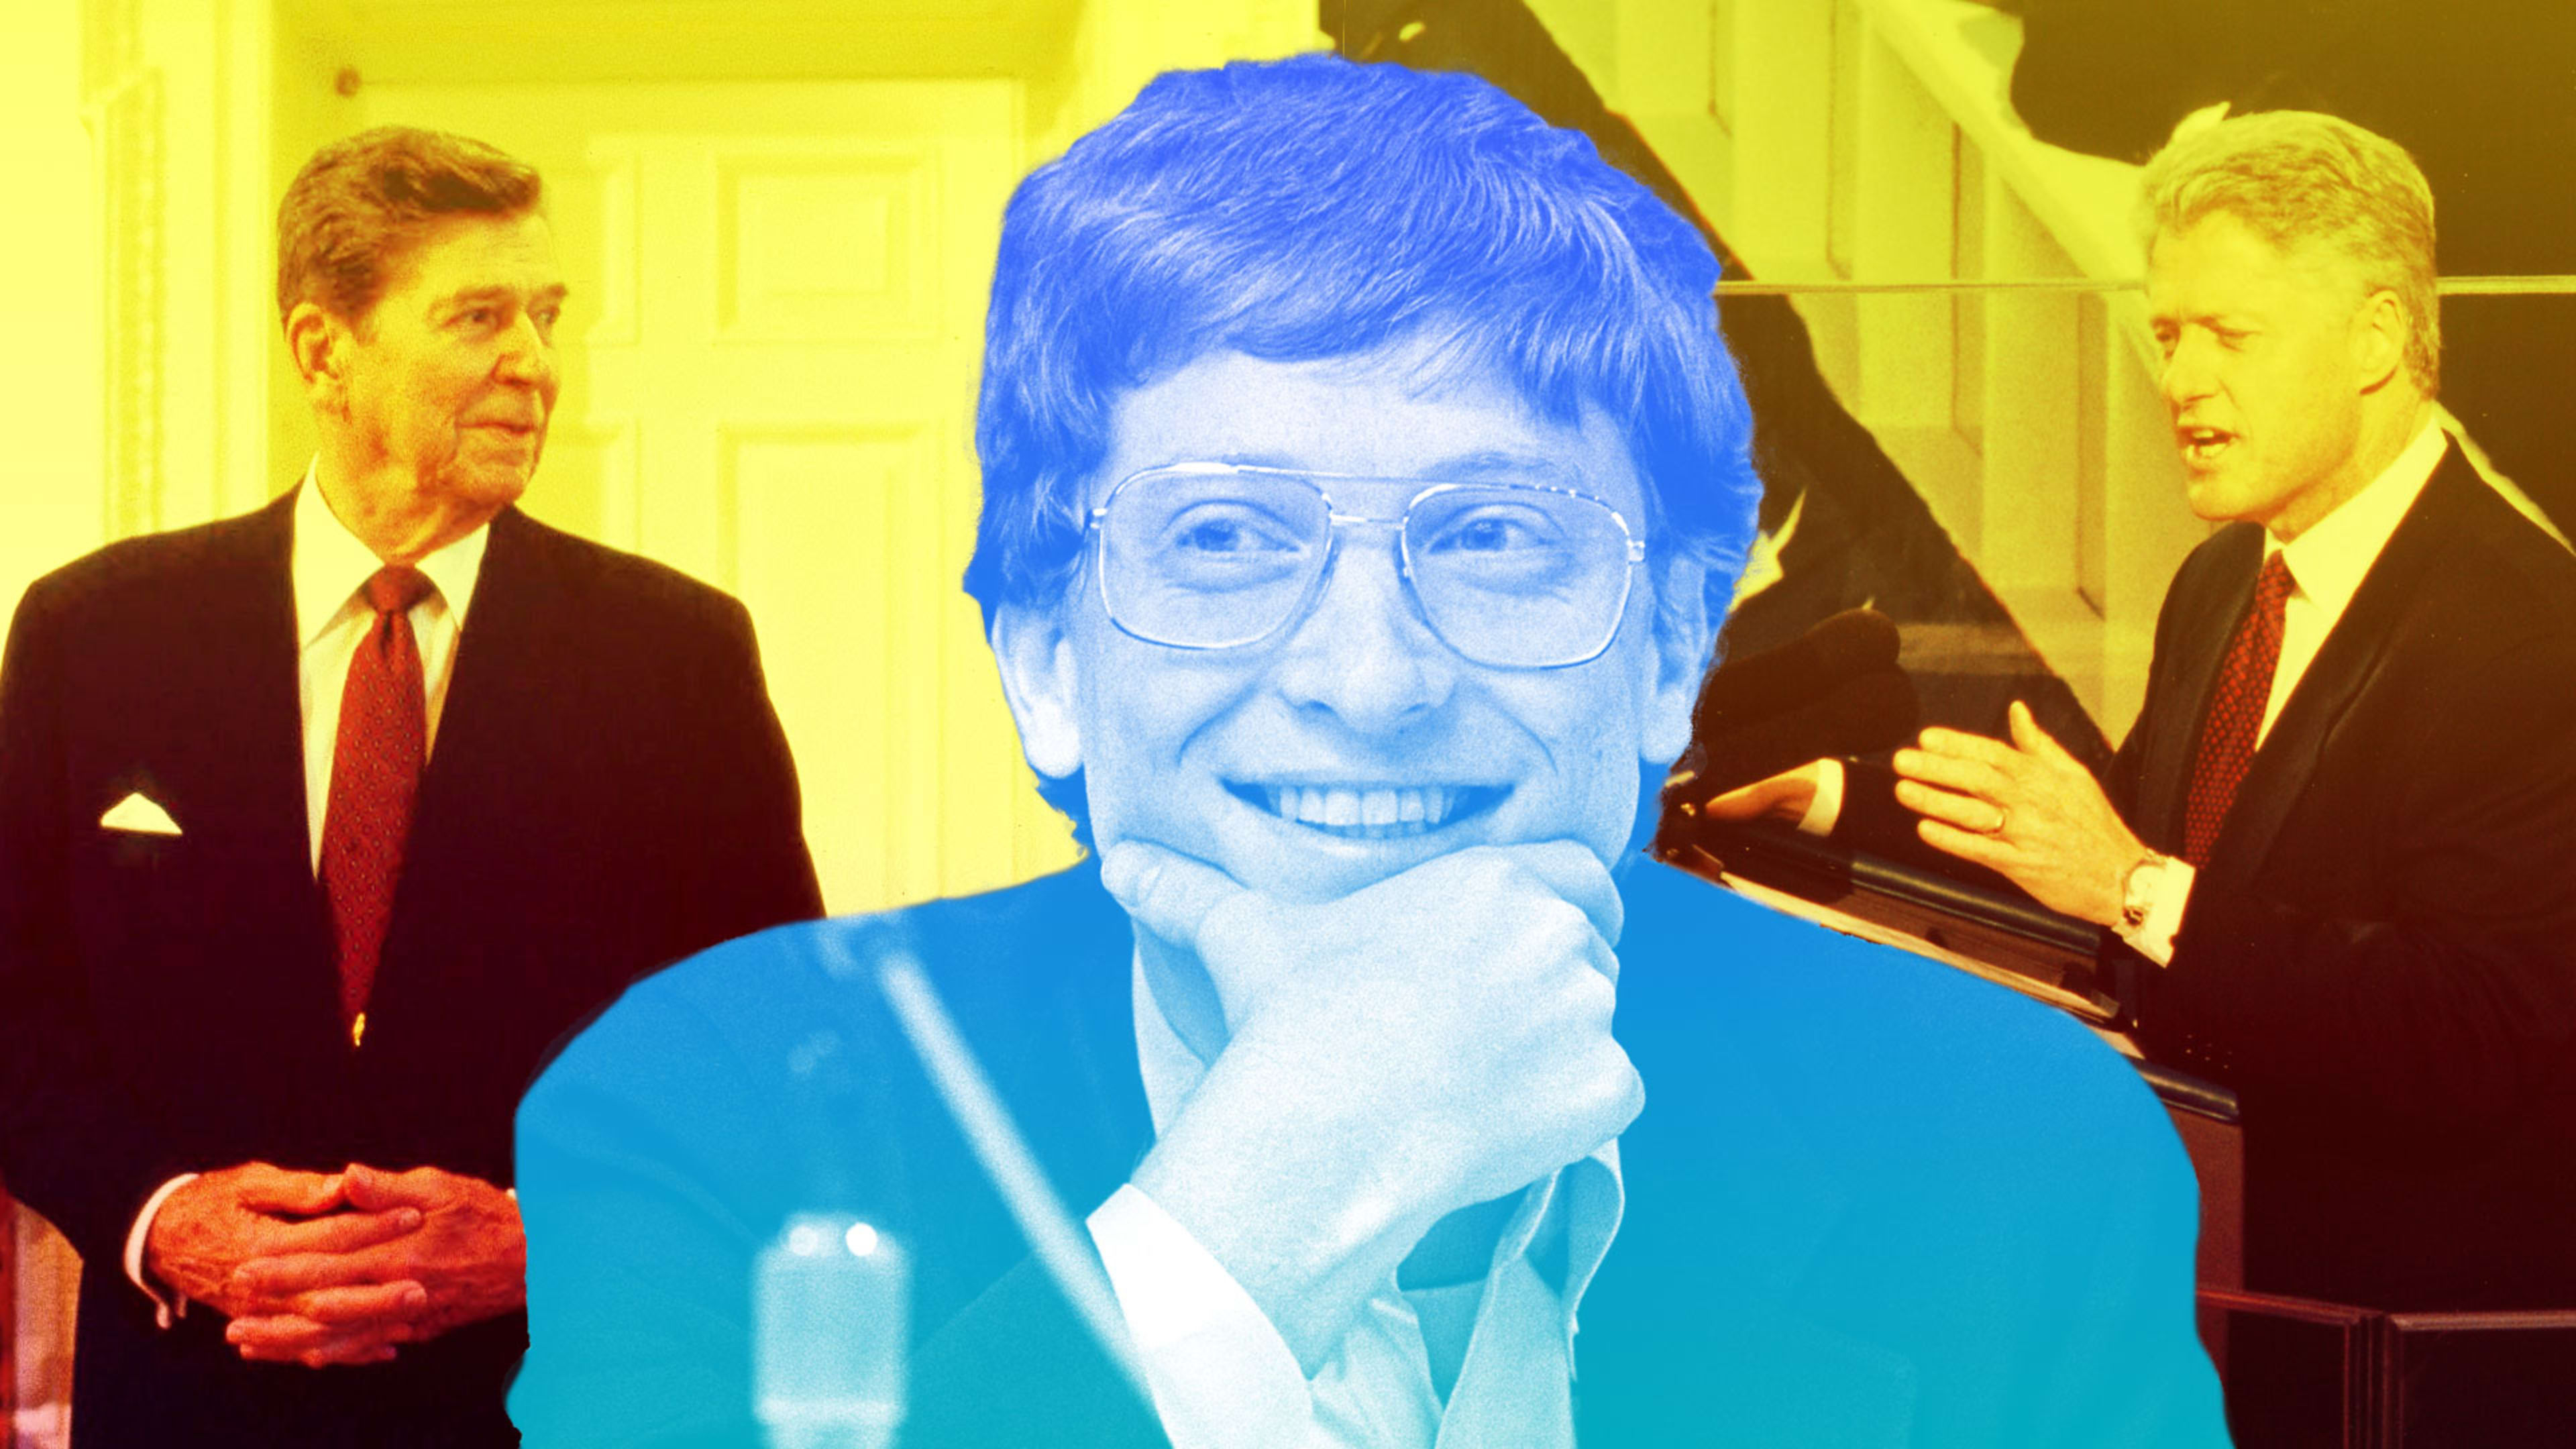 How Reagan, Clinton, and Bill Gates paved the way for the rise of Big Tech